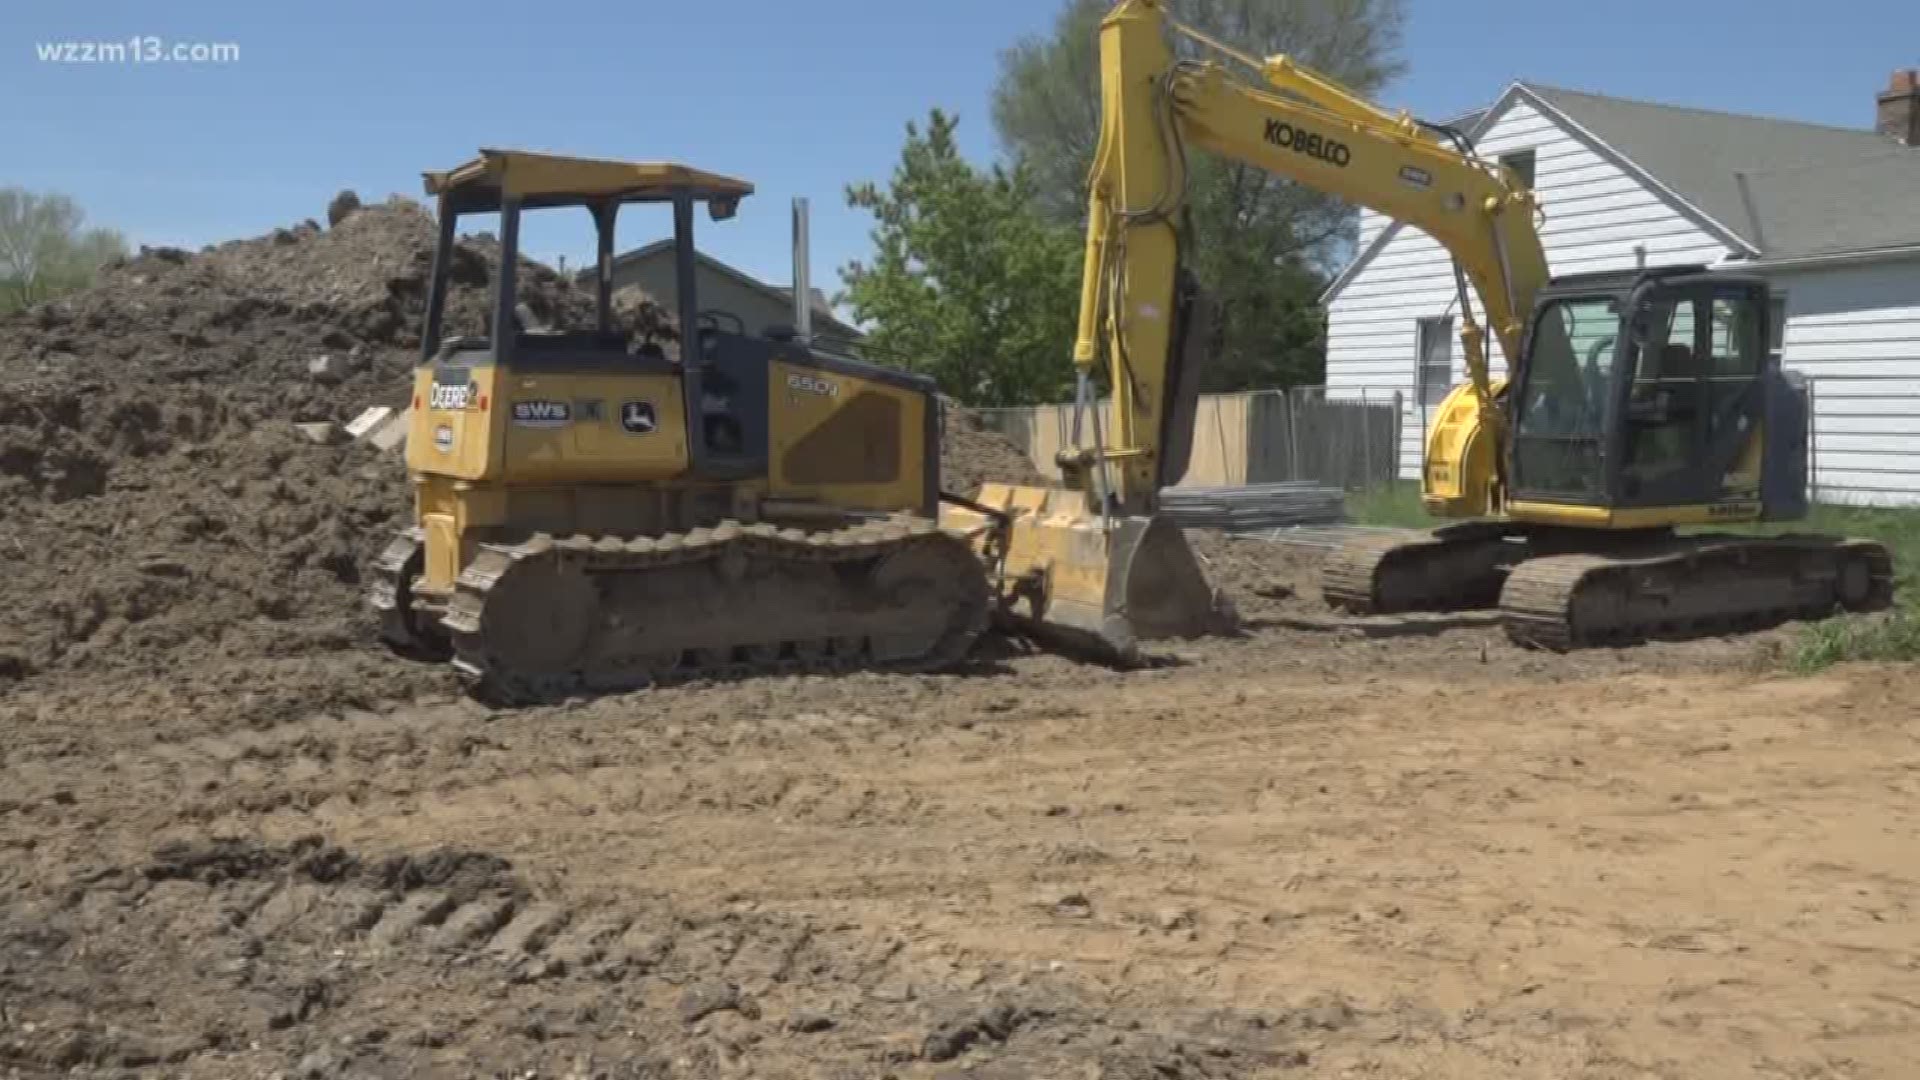 Groundbreaking for affordable housing in Ottawa County